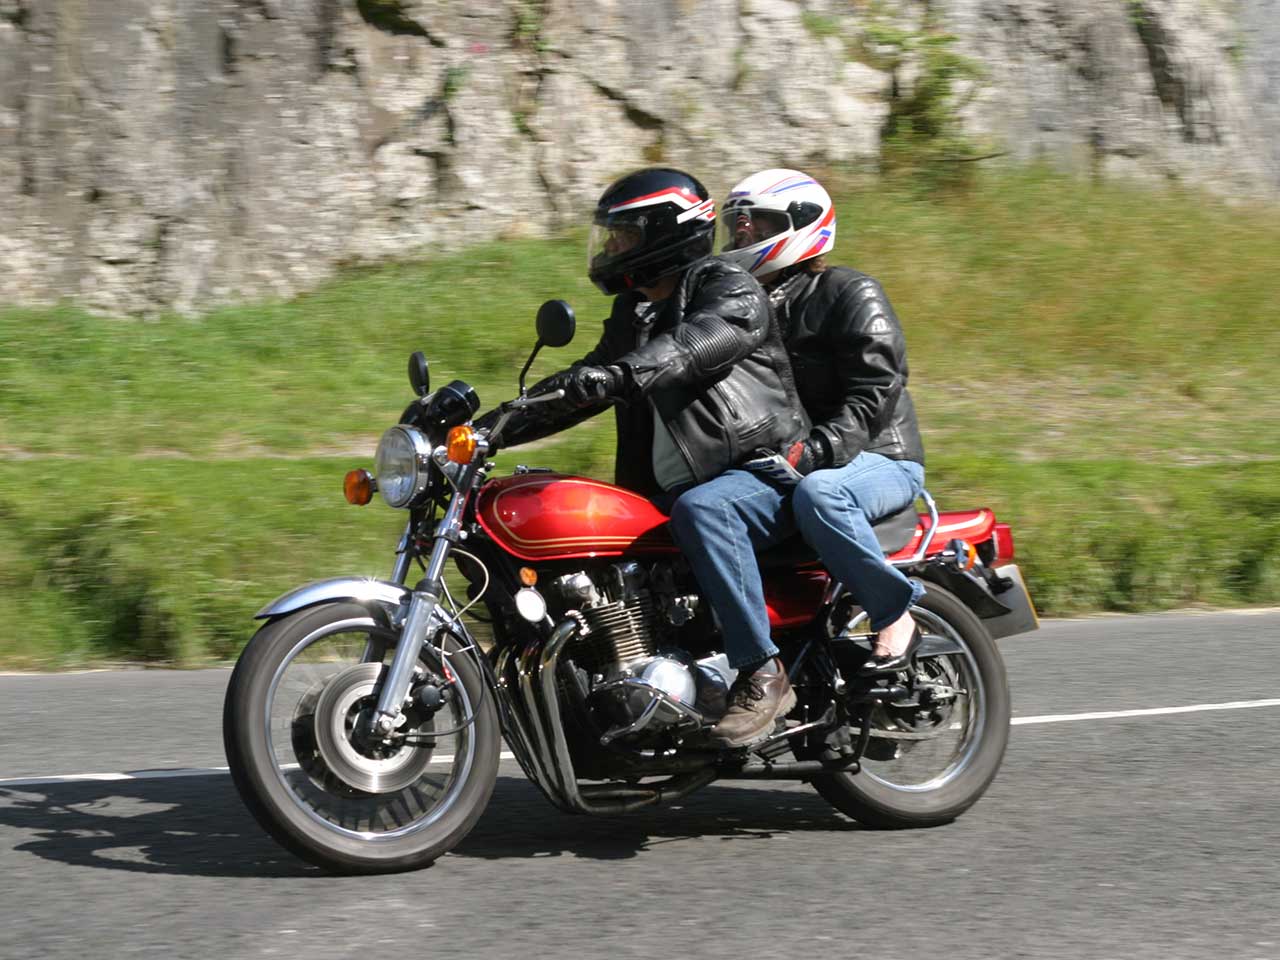 Motorbike with a driver and pillion passenger